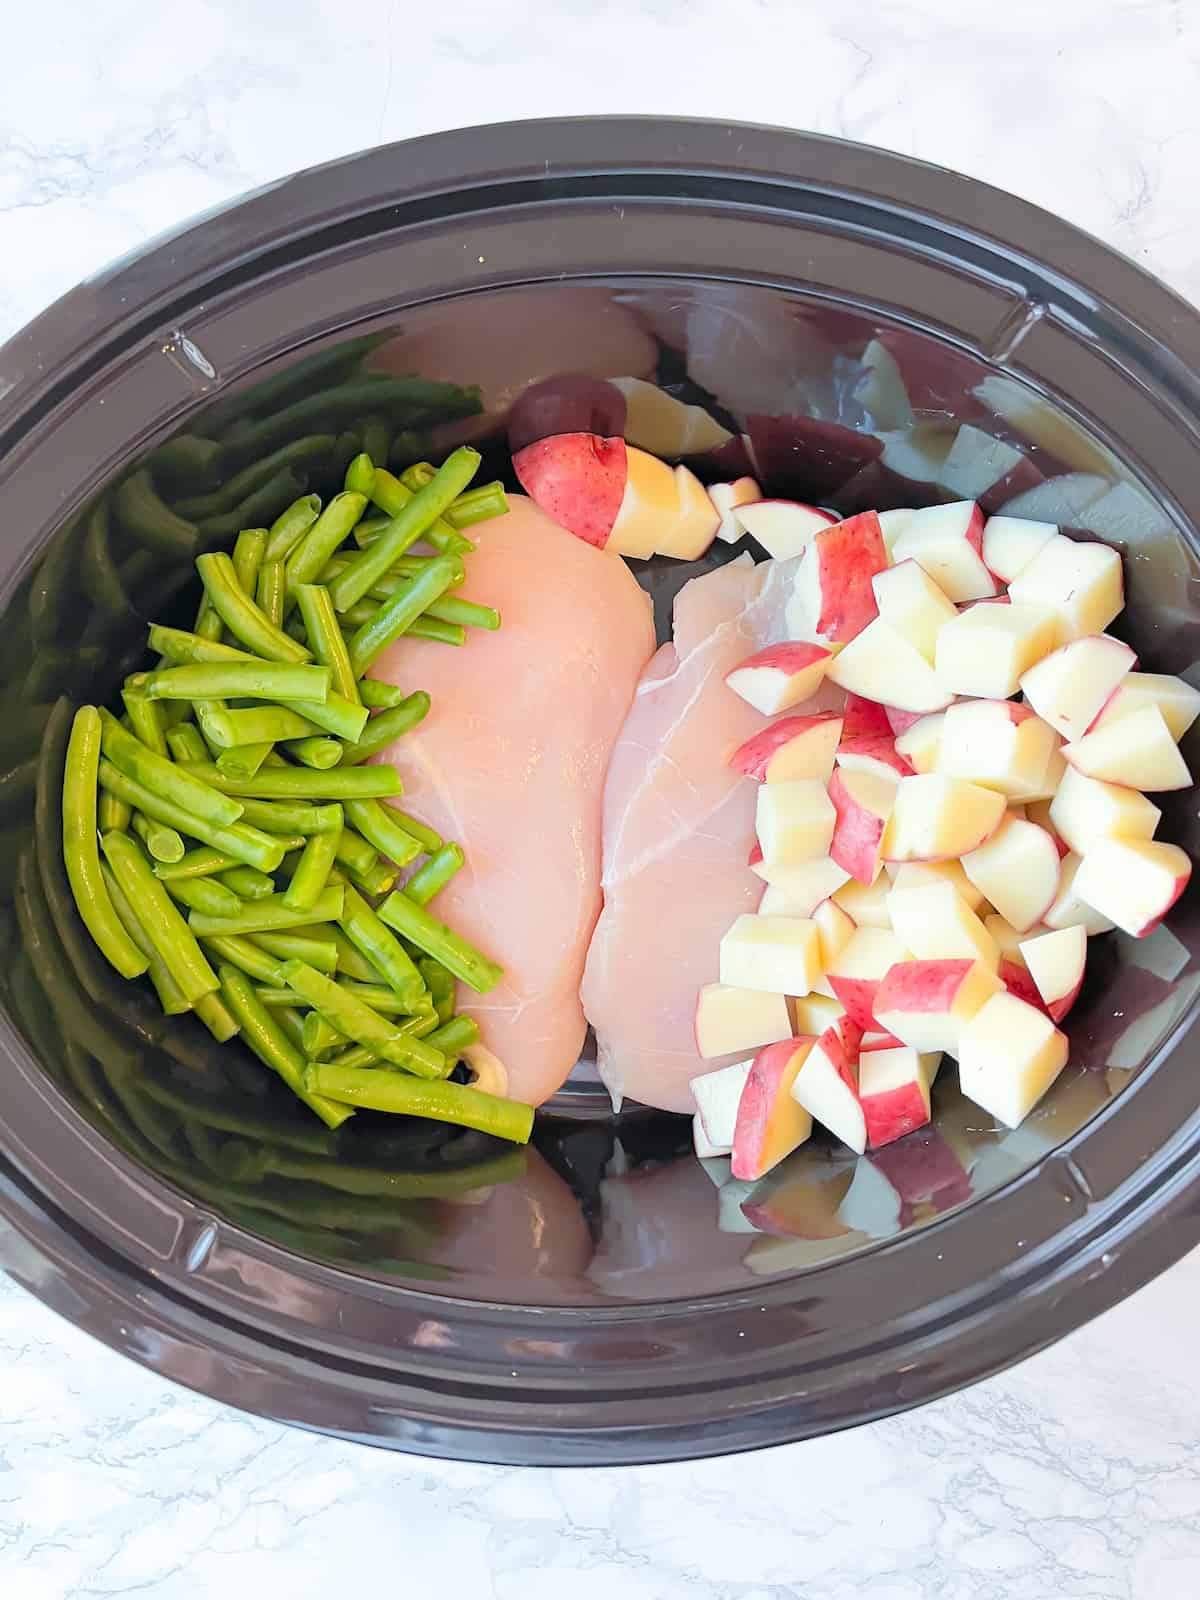 Slow cooker chicken and potatoes in the bottom of a crockpot with green beans and red potatoes stacked to the side of boneless, skinless chicken breasts which are in the center in an even layer